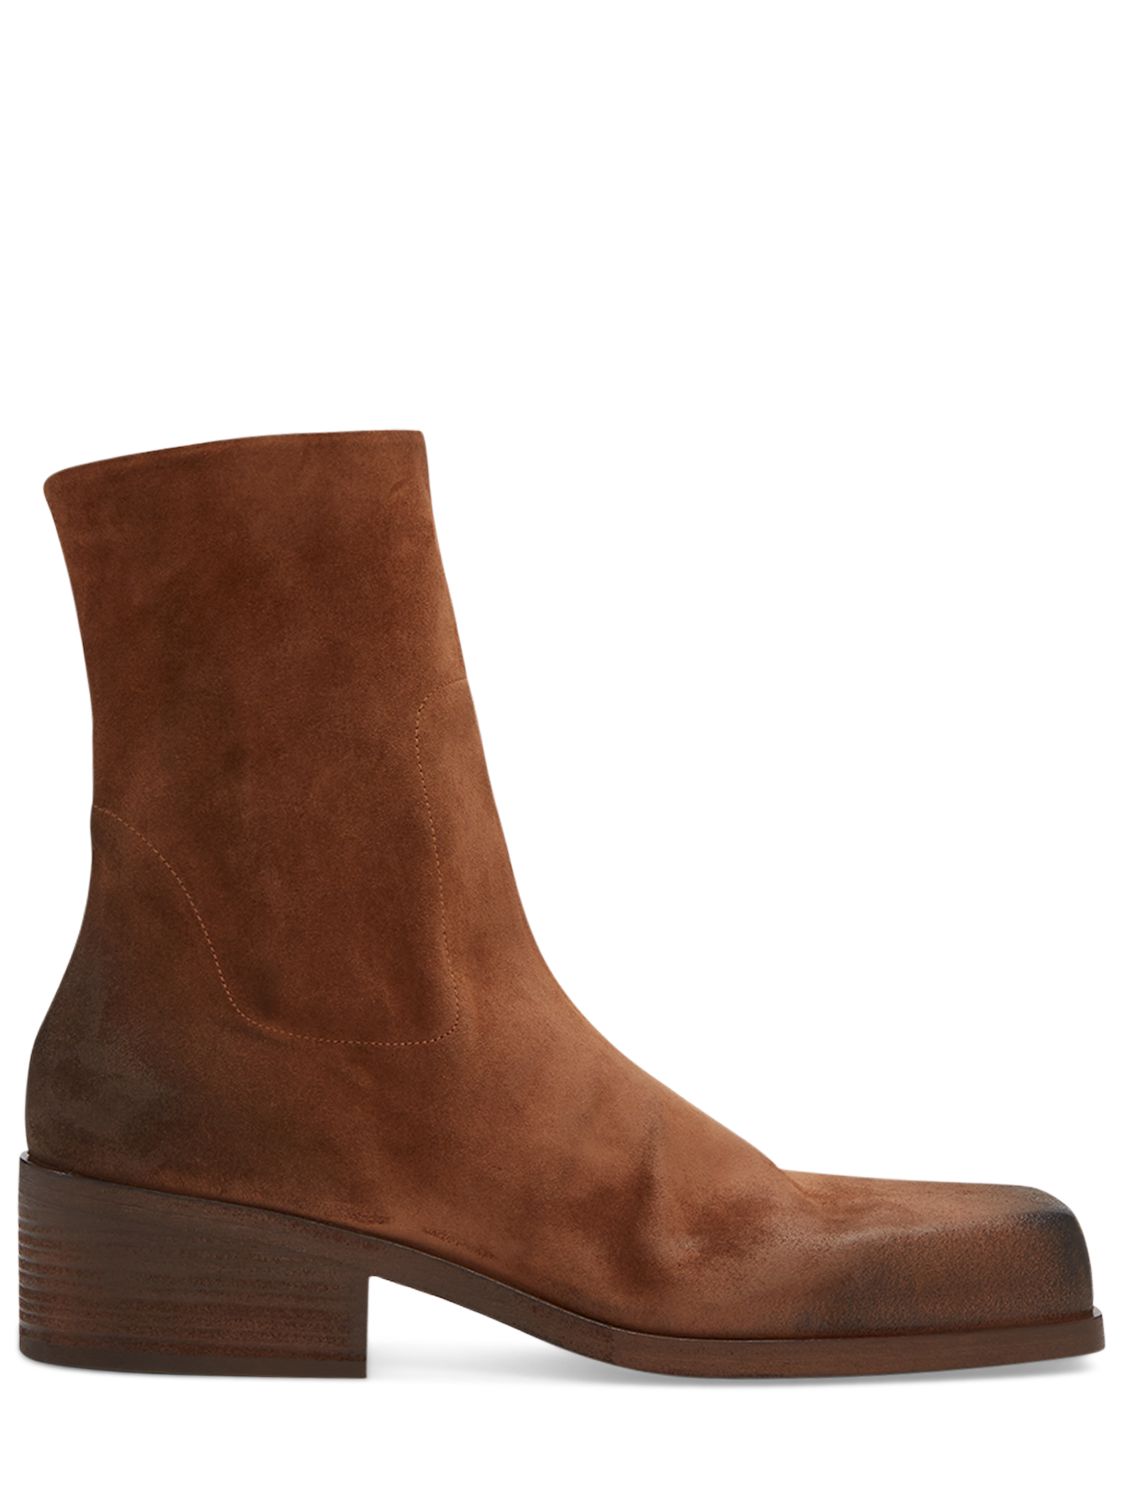 Cassello Suede Boots